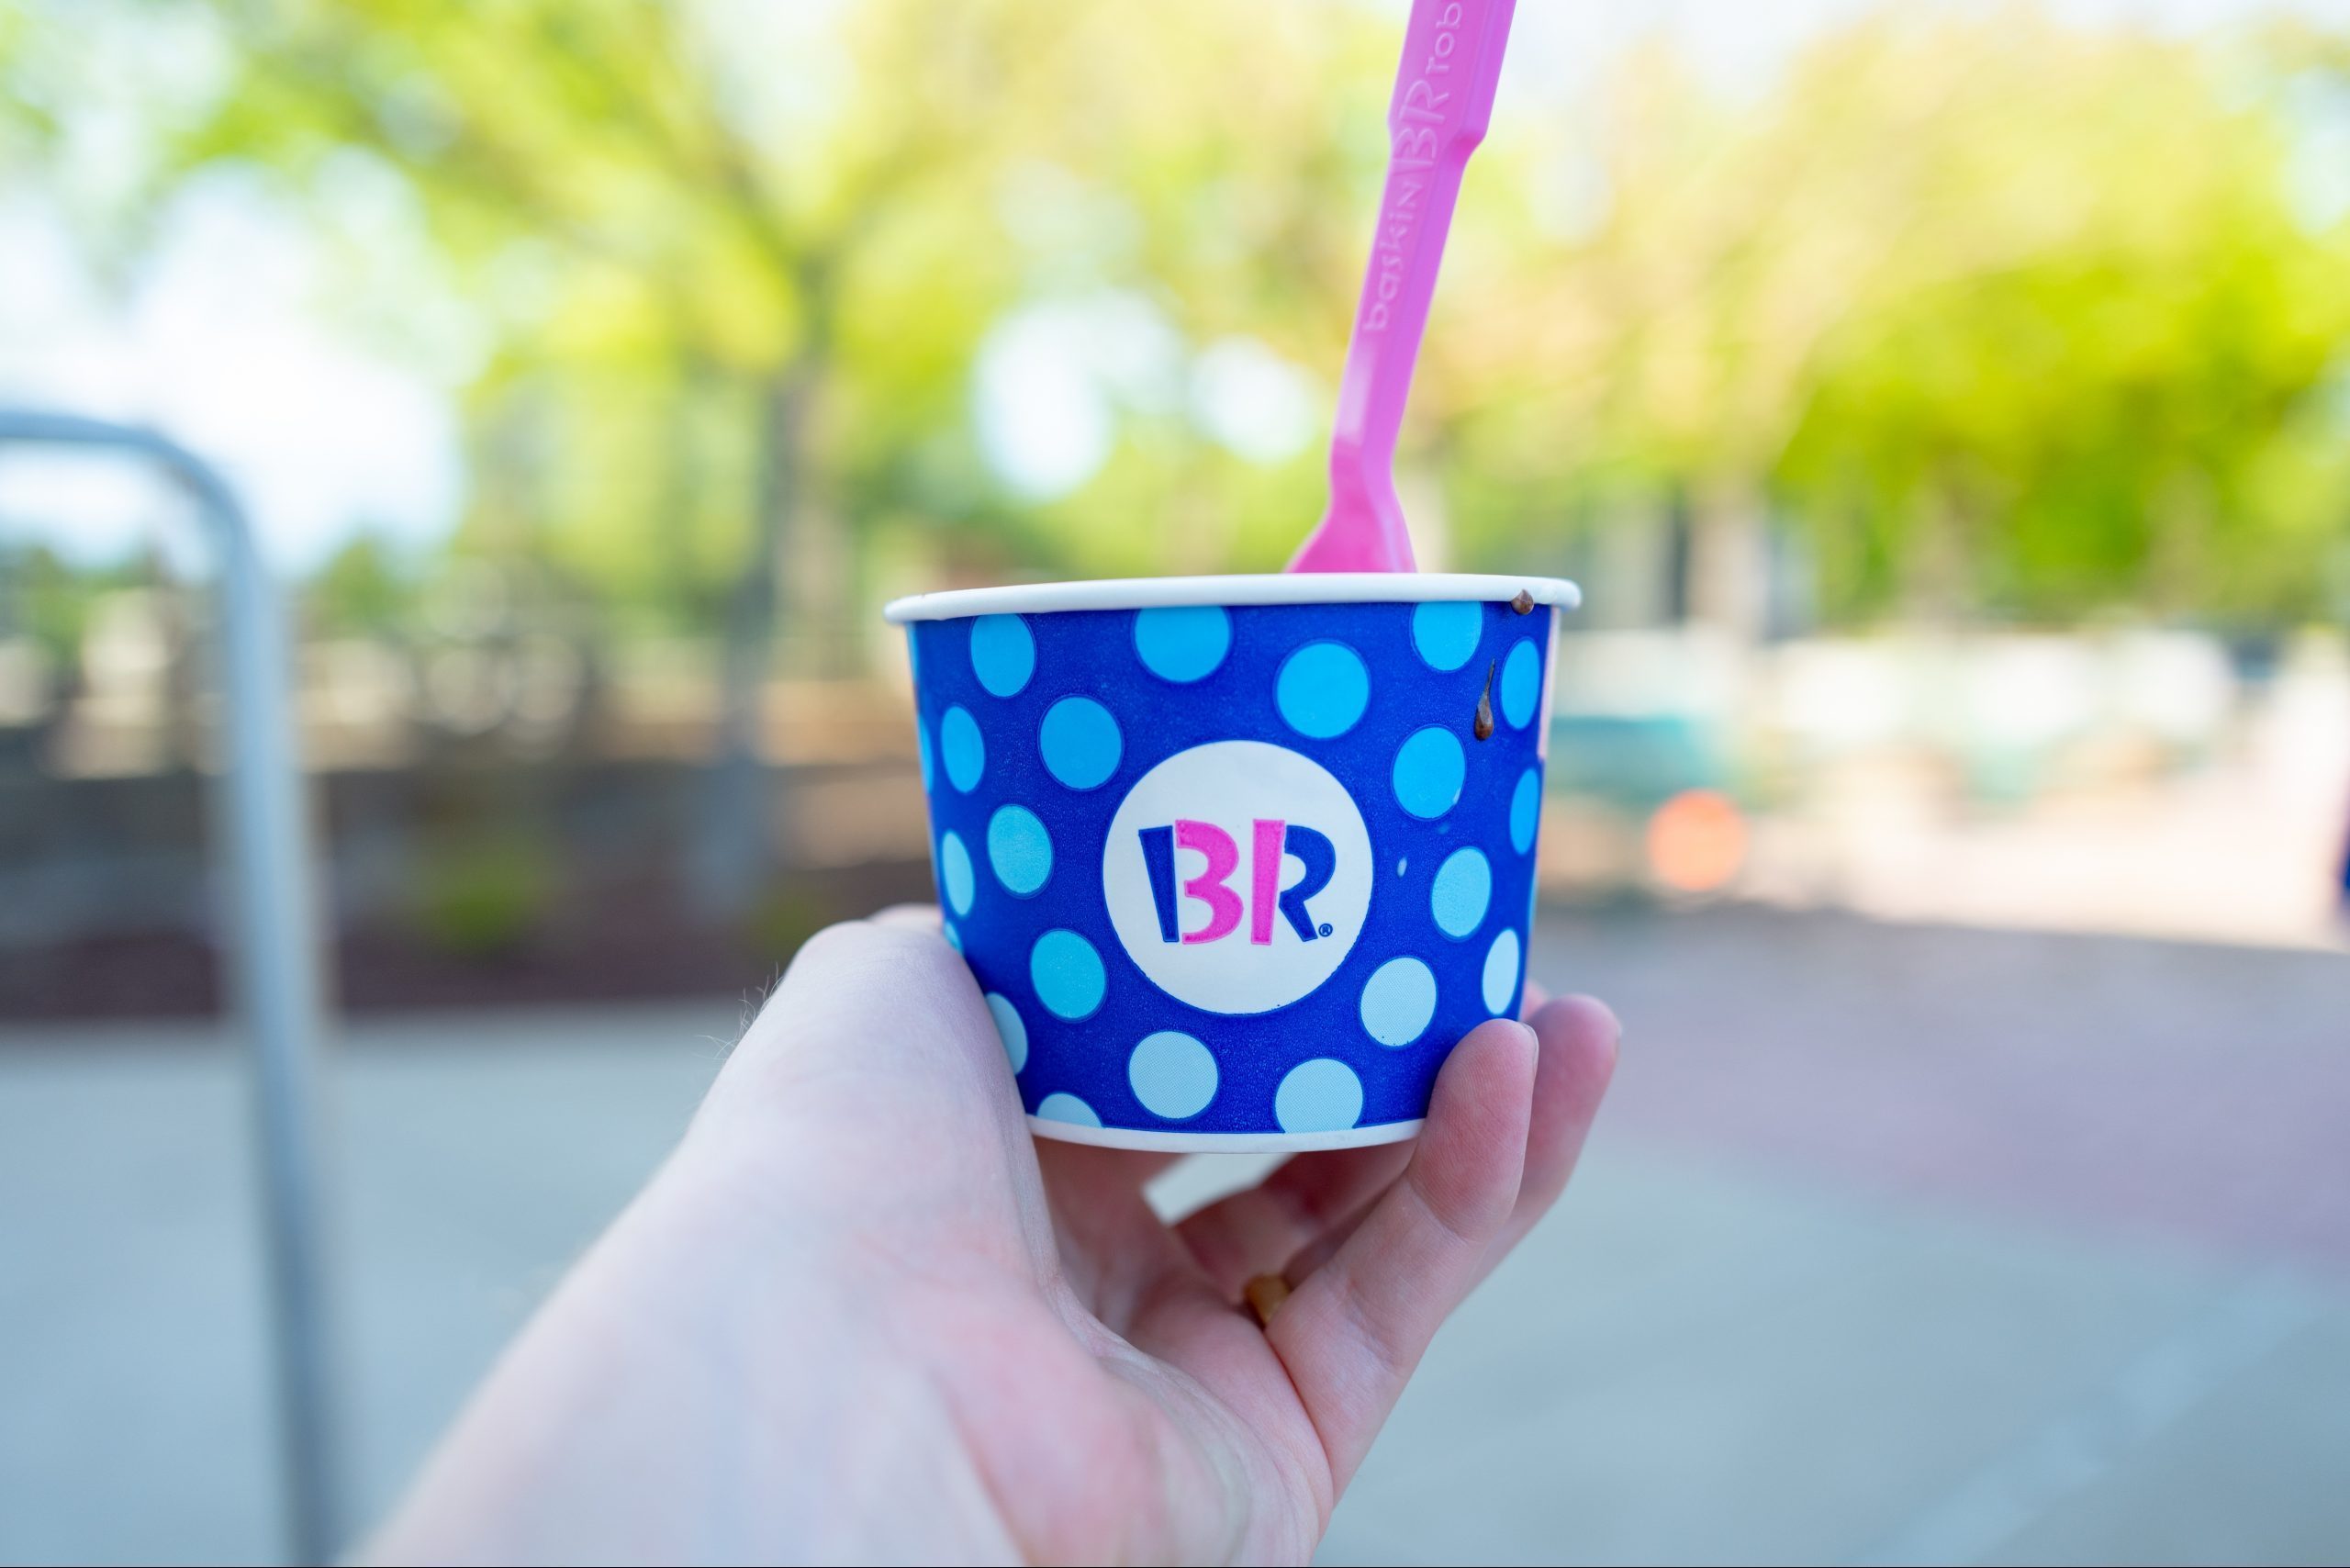 The Hidden Detail on the Baskin Robbins Logo You Never Noticed Before